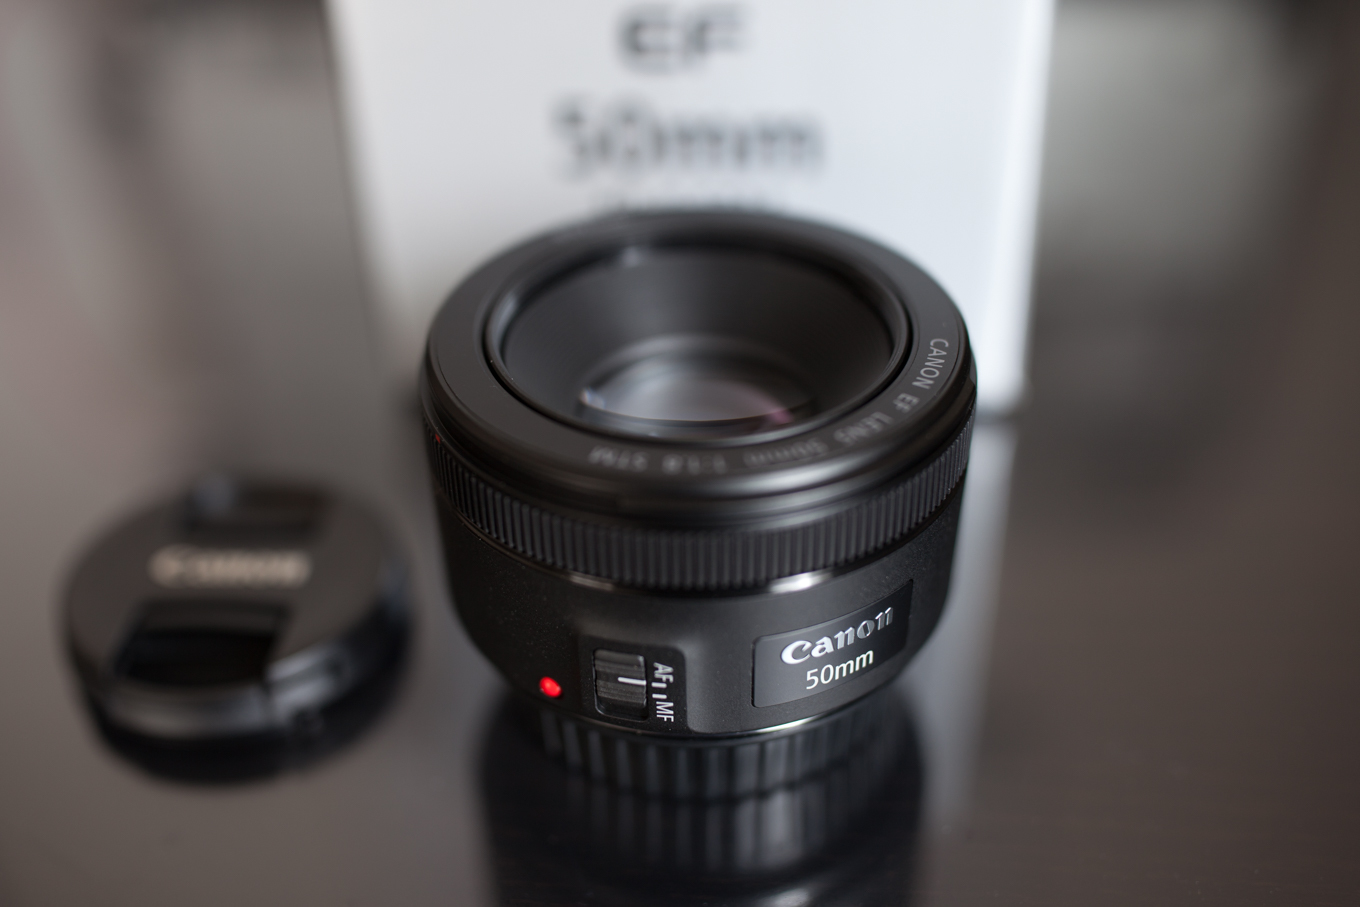 EF50mm F1.8 STM with EF50F1.8STM用つけっぱなしフード : Full of LIFE